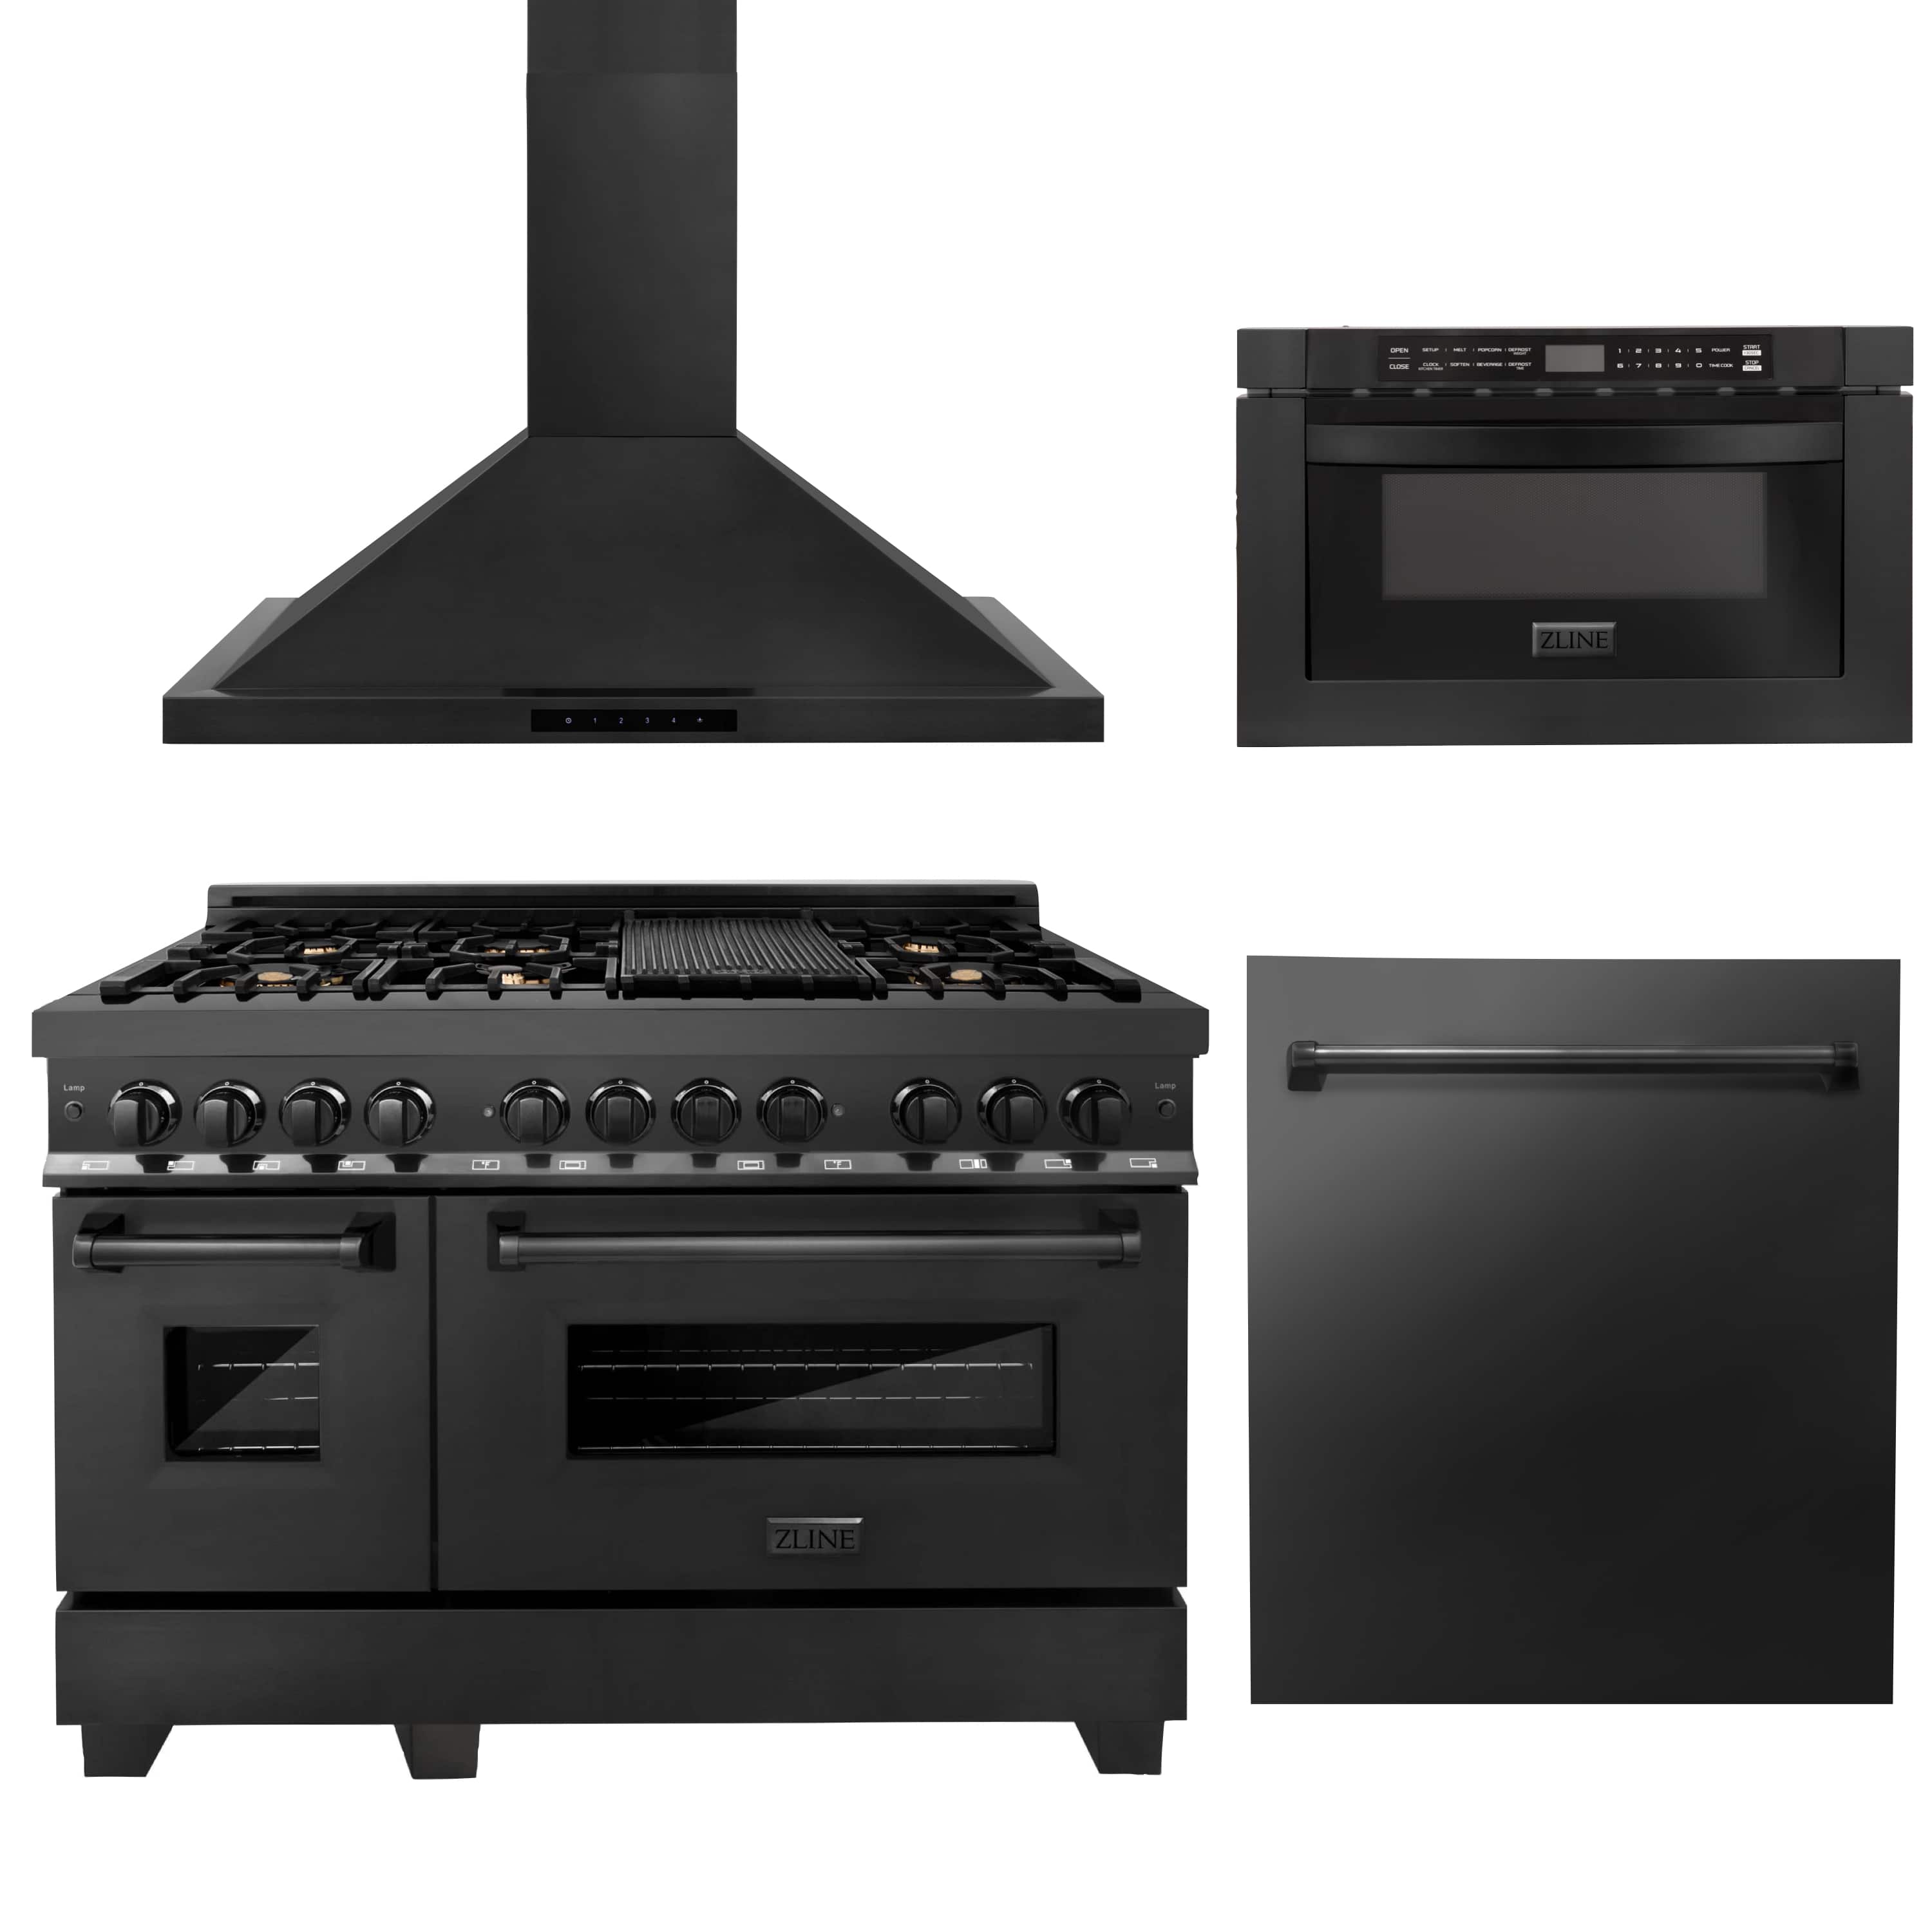 ZLINE 4-Piece Appliance Package - 48-inch Dual Fuel Range with Brass Burners, Dishwasher, Microwave Drawer & Convertible Wall Mount Hood in Black Stainless Steel (4KP-RABRH48-MWDW)